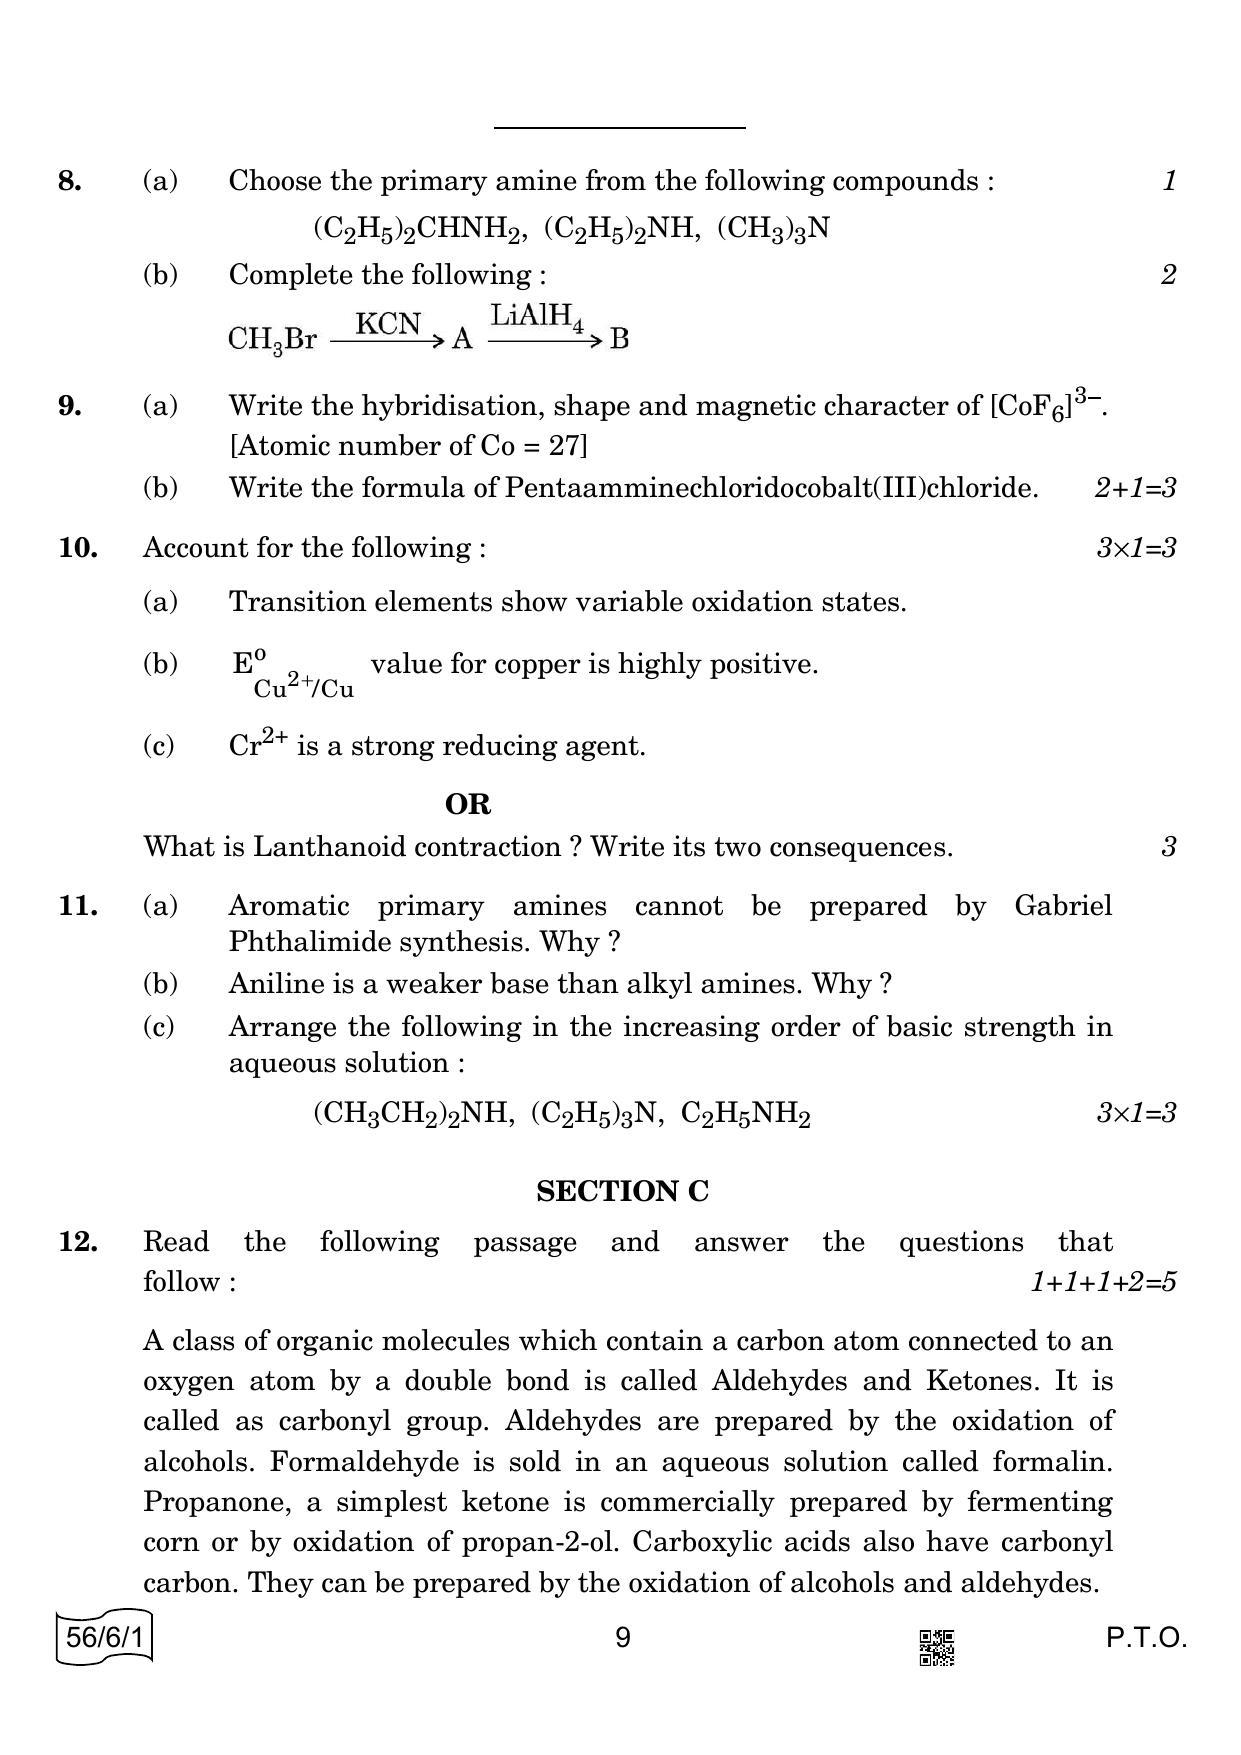 CBSE Class 12 56-6-1 CHEMISTRY 2022 Compartment Question Paper - Page 9